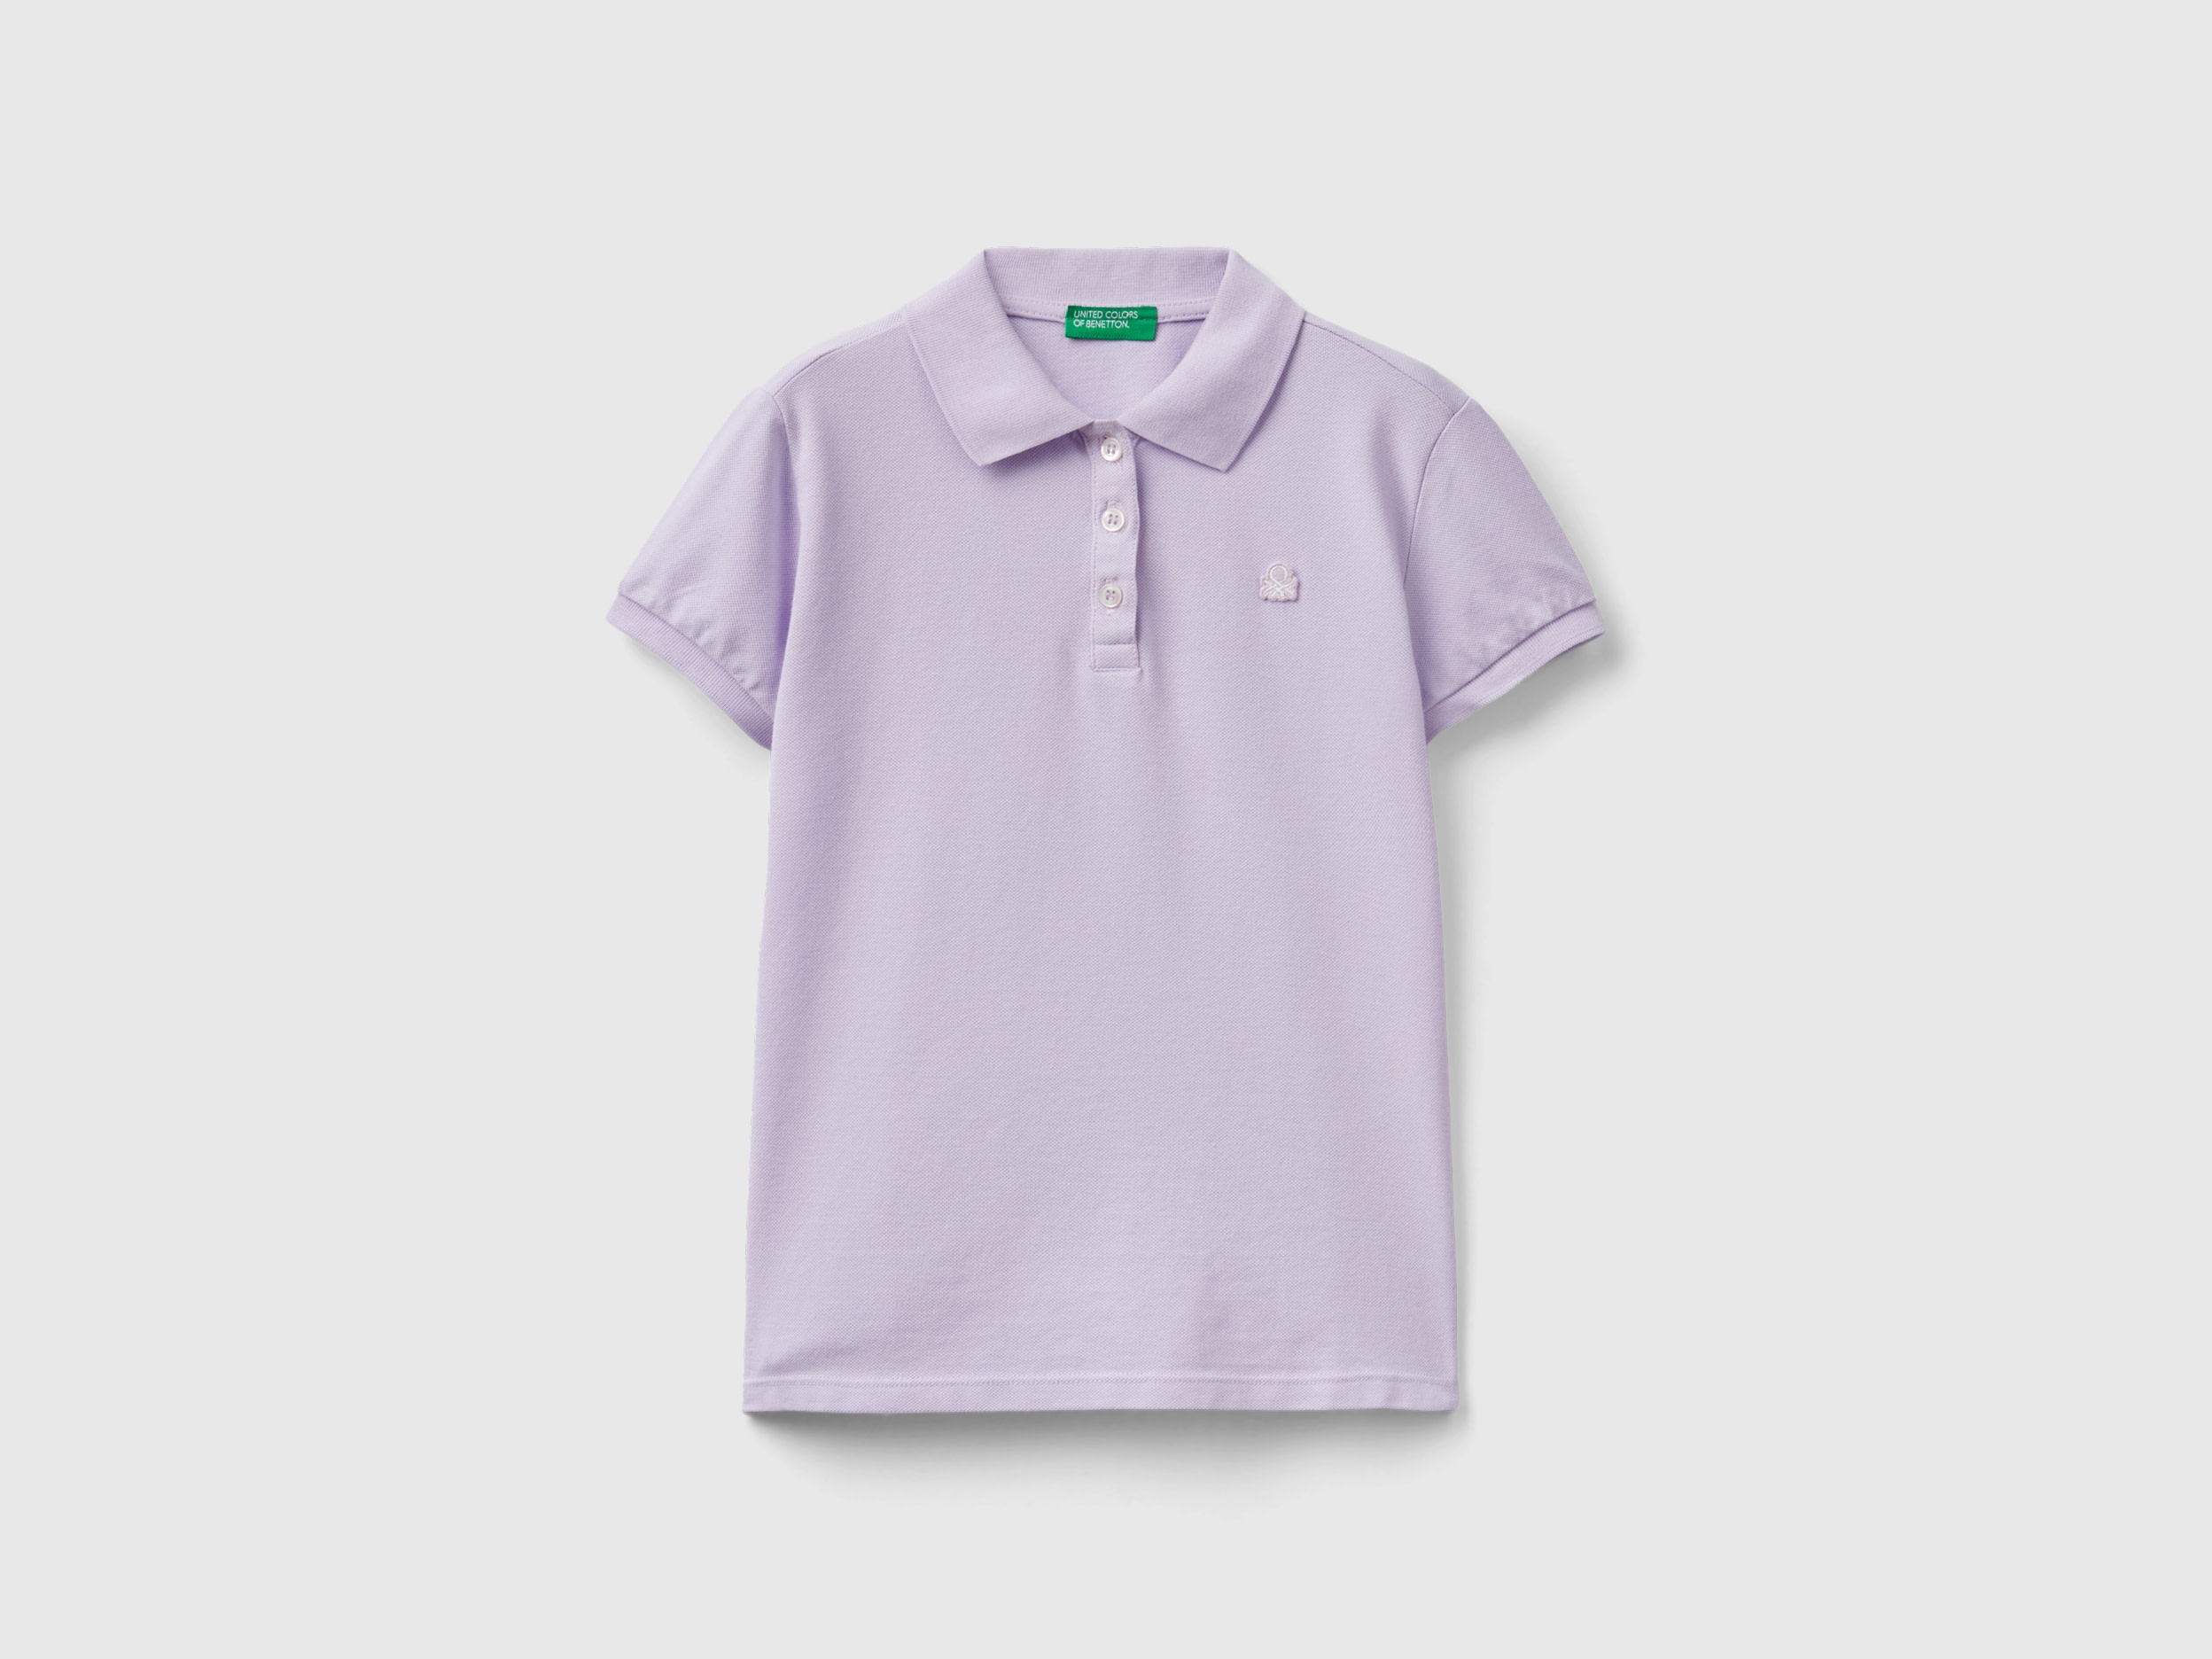 Image of Benetton, Short Sleeve Polo In Organic Cotton, size M, Lilac, Kids